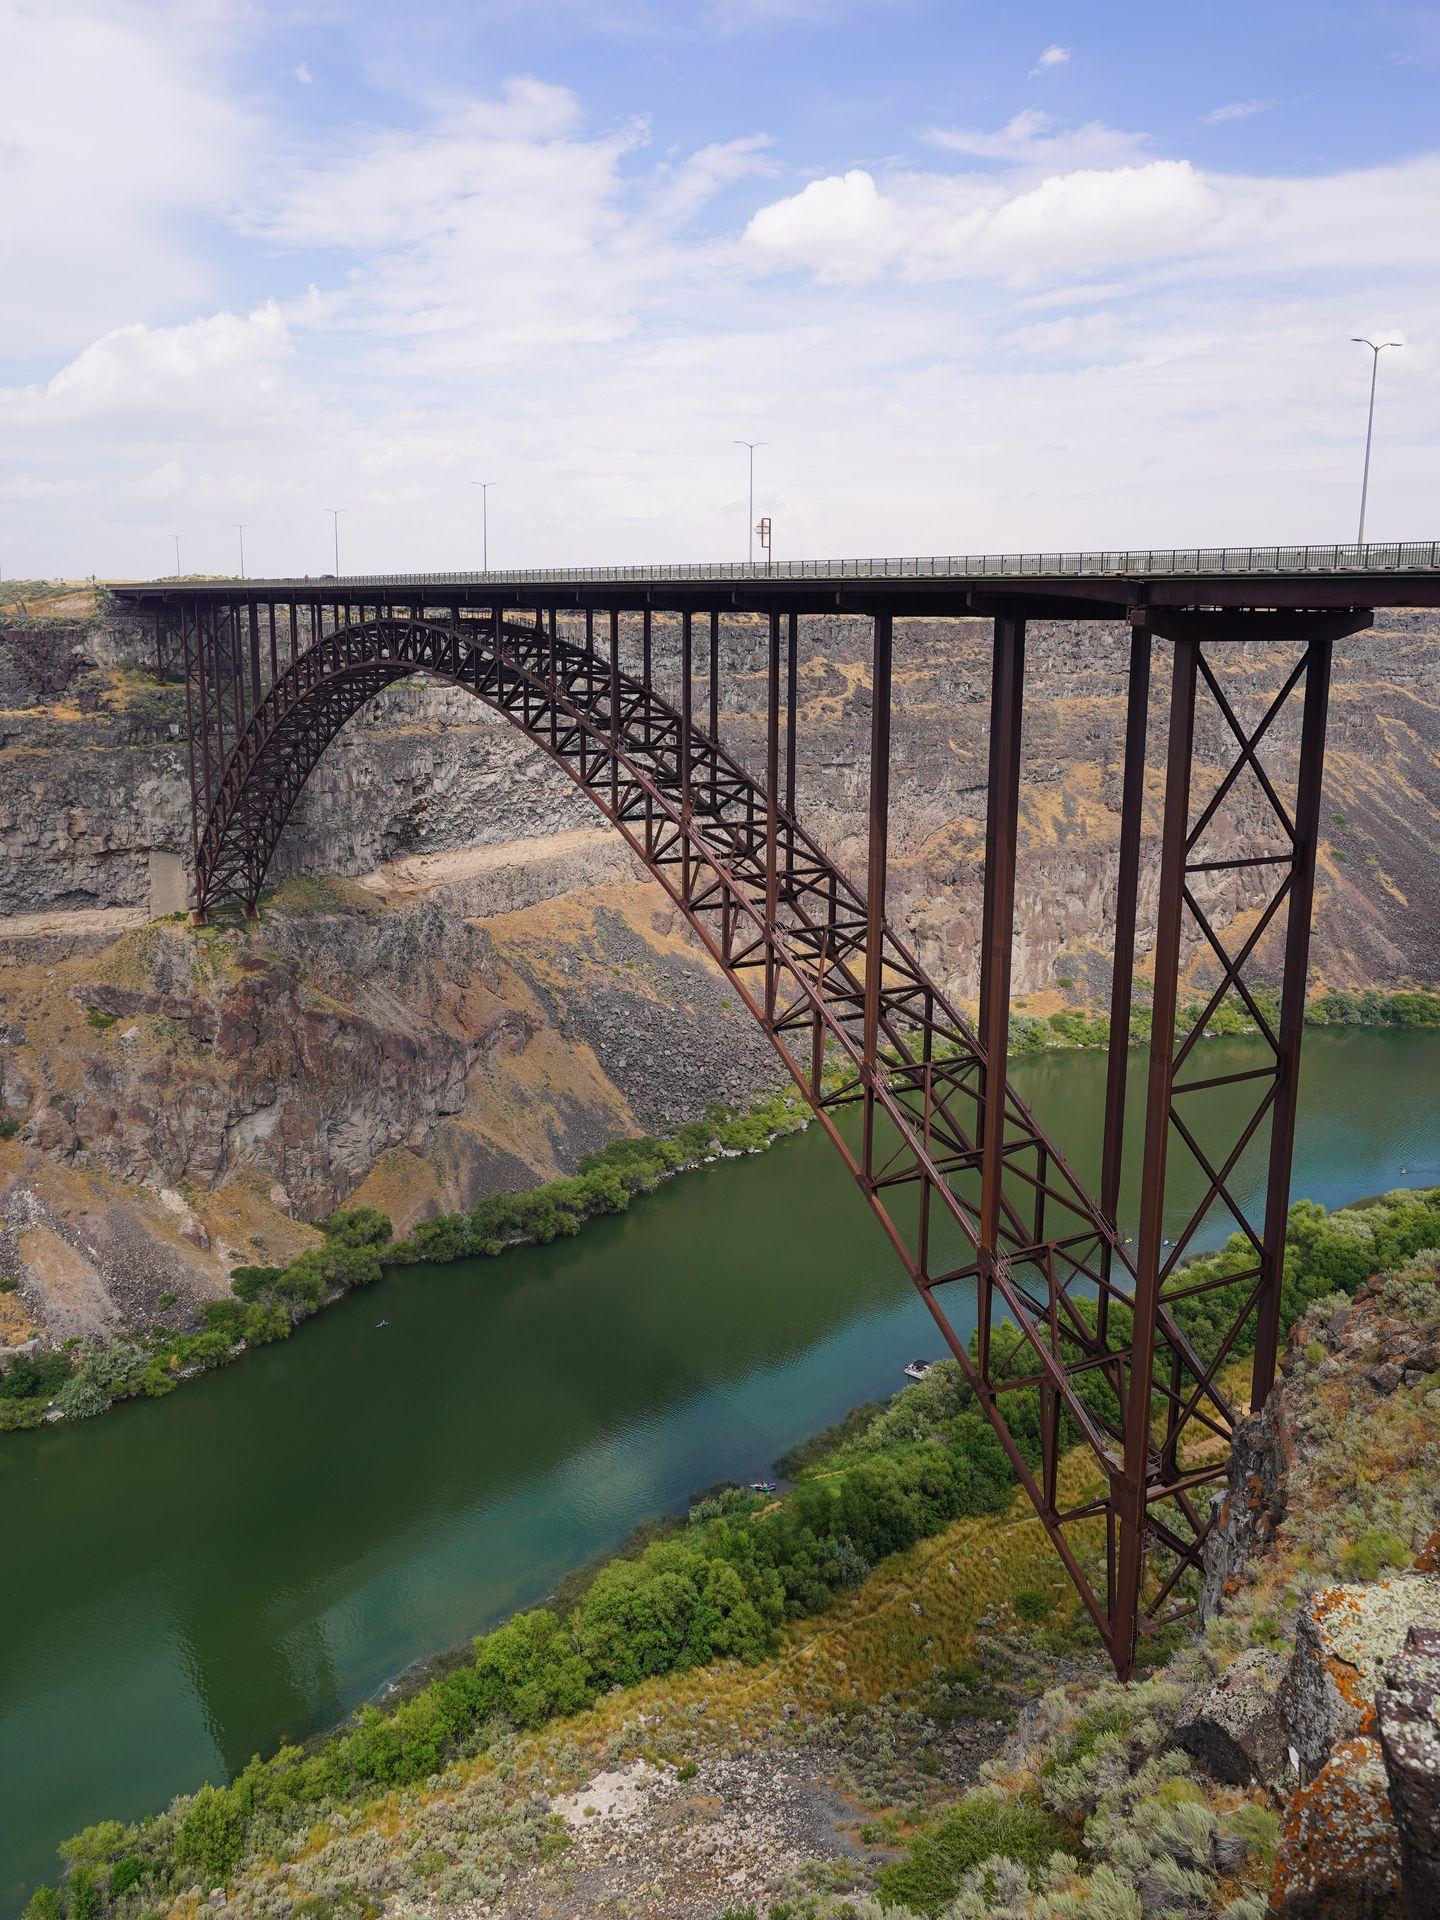 A view of the Perrine Memorial Bridge from the rim of the canyon.